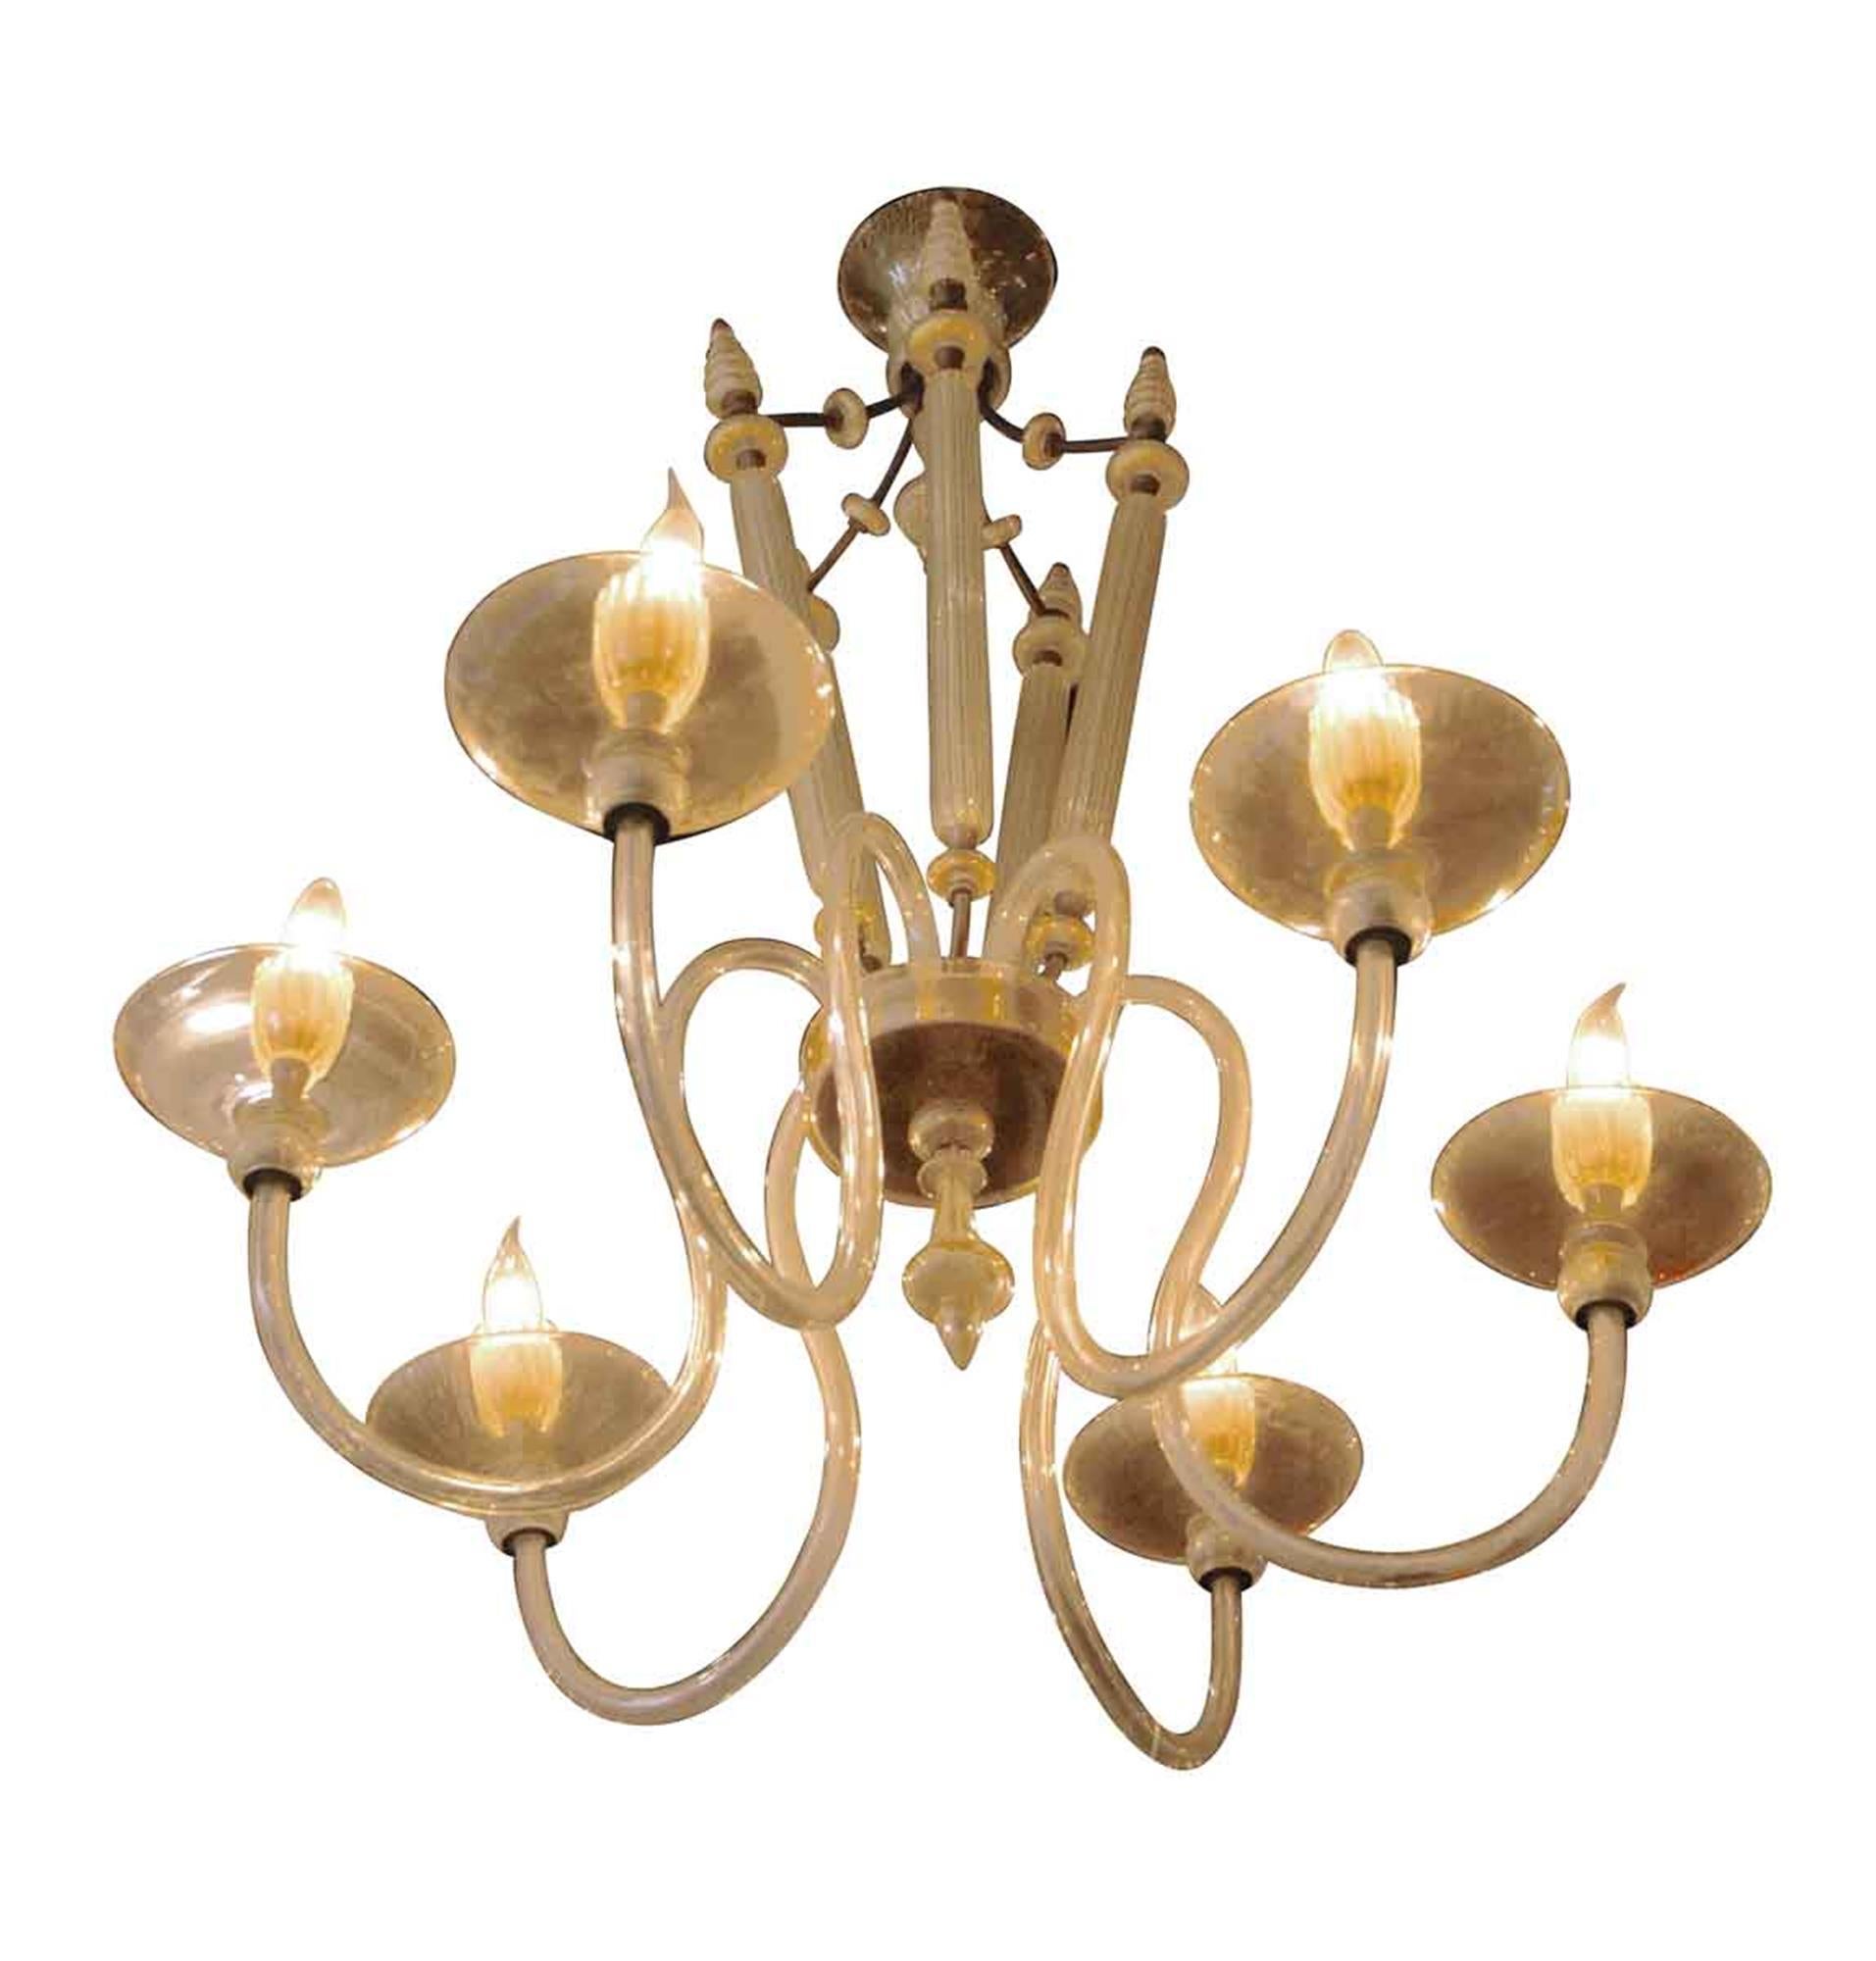 Original Mid-Century Modern Venini 1950s six-light fixture. This chandelier has beehive shaped hand blown glass doodads and cylinders. Please note, this item is located in one of our NYC locations.